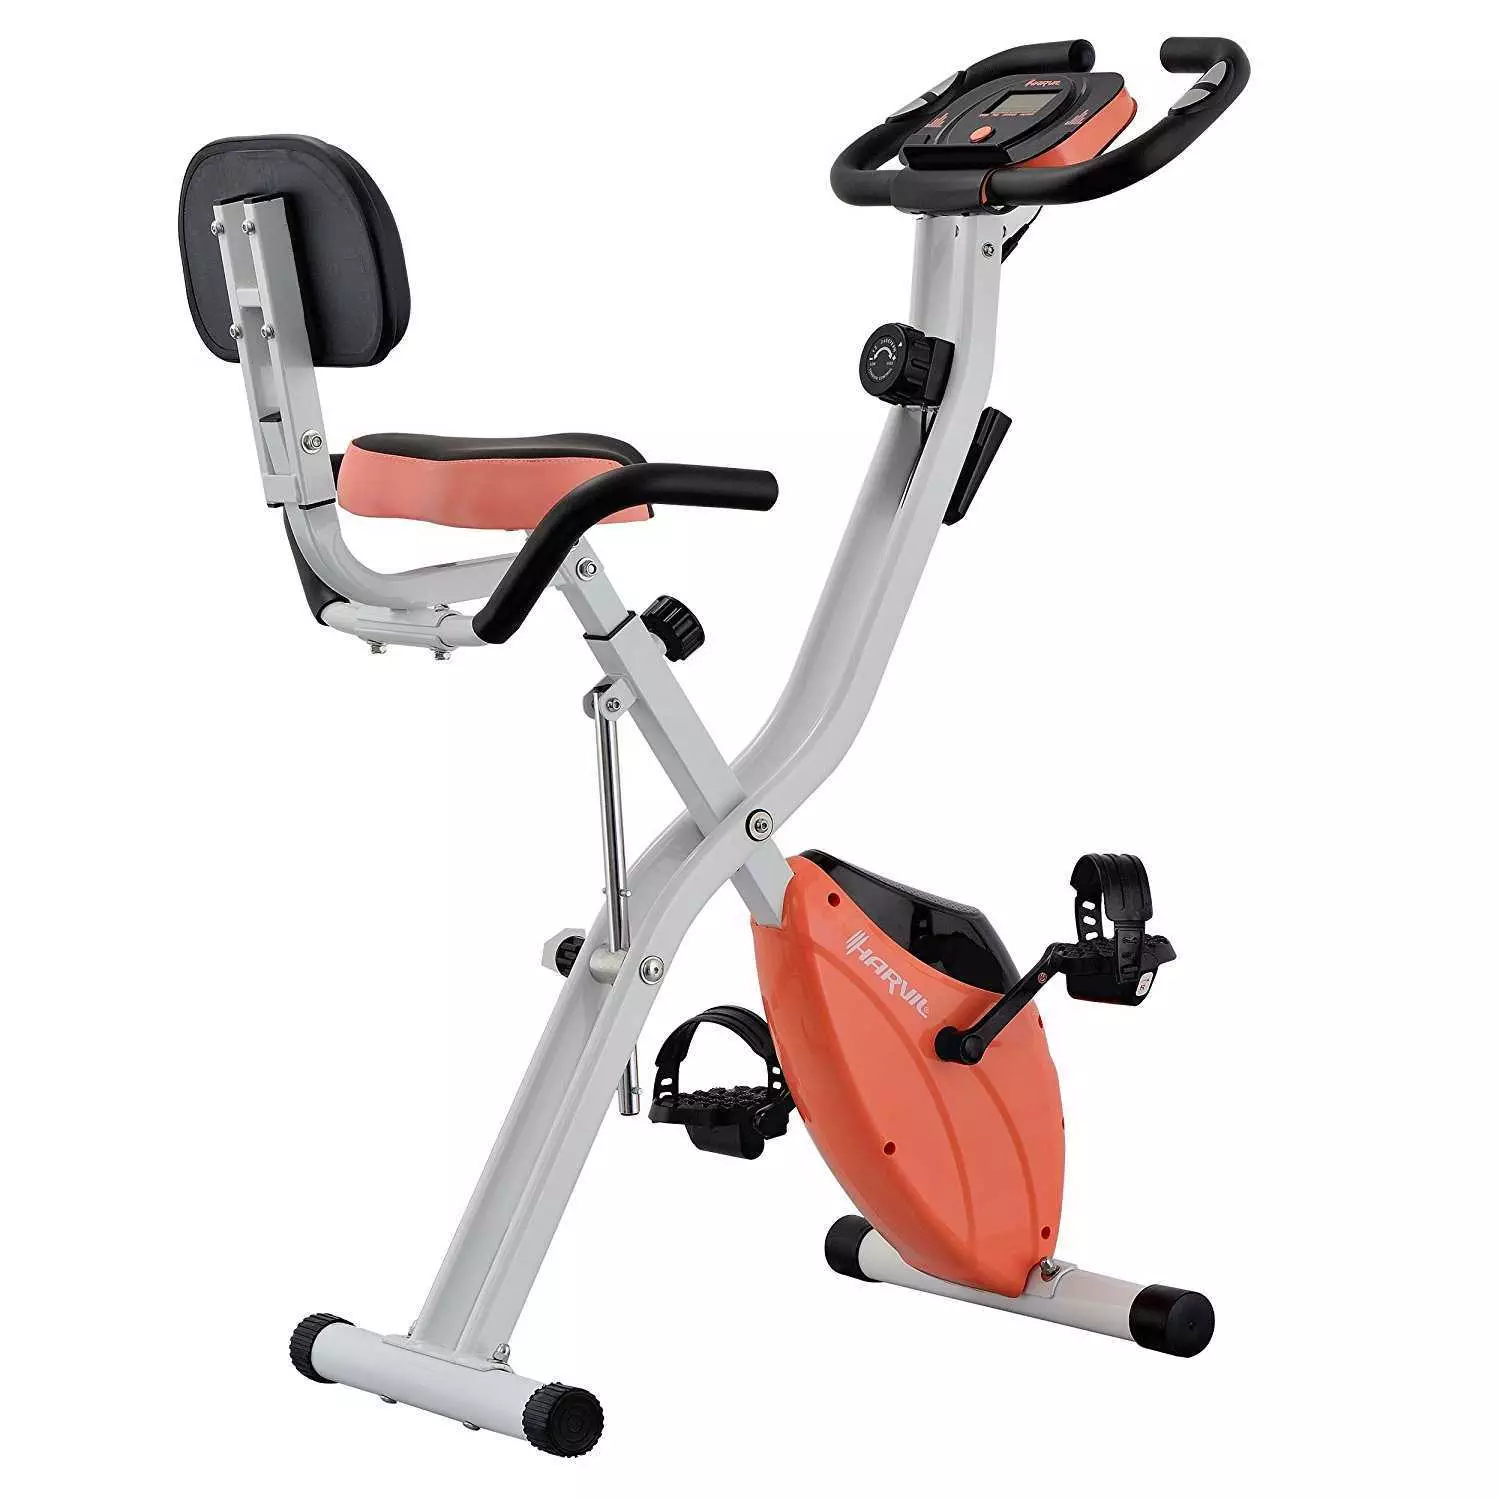 Havril Foldable Exercise Bike Unfolded View